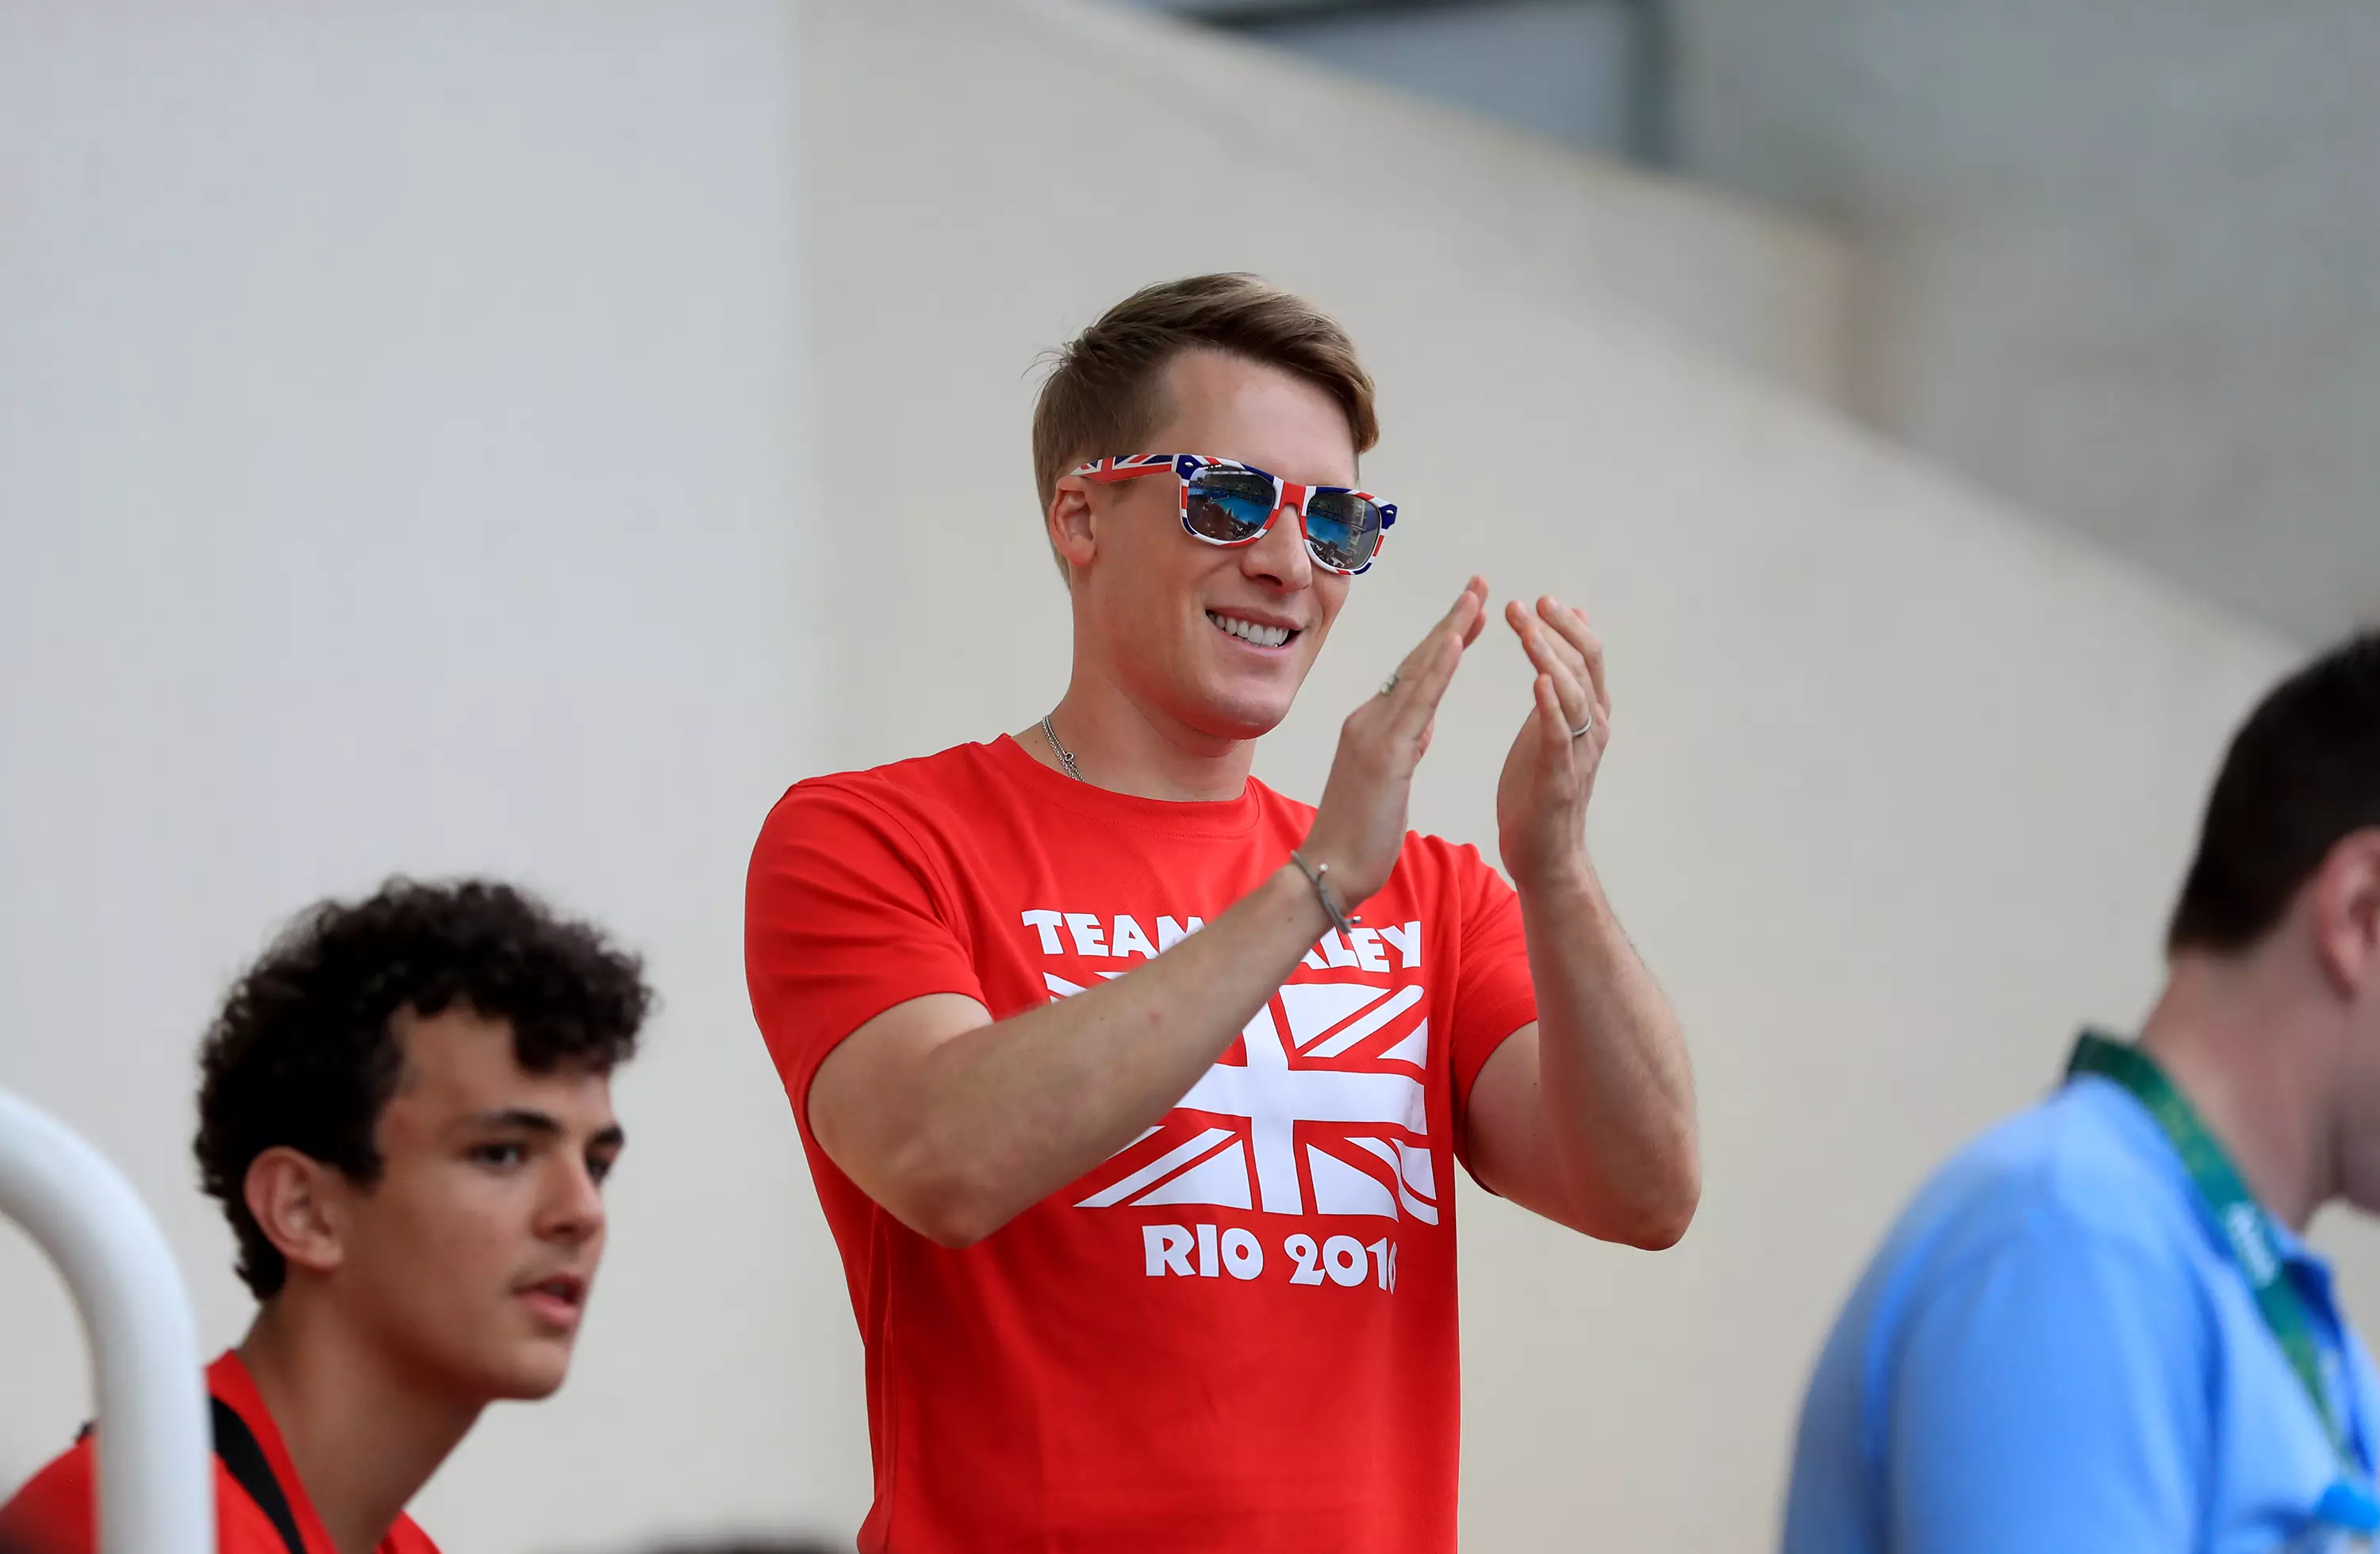 Tom Daley's husband, Dustin Lance Black, cheering Tom on at the Rio 2016 Olympics. (